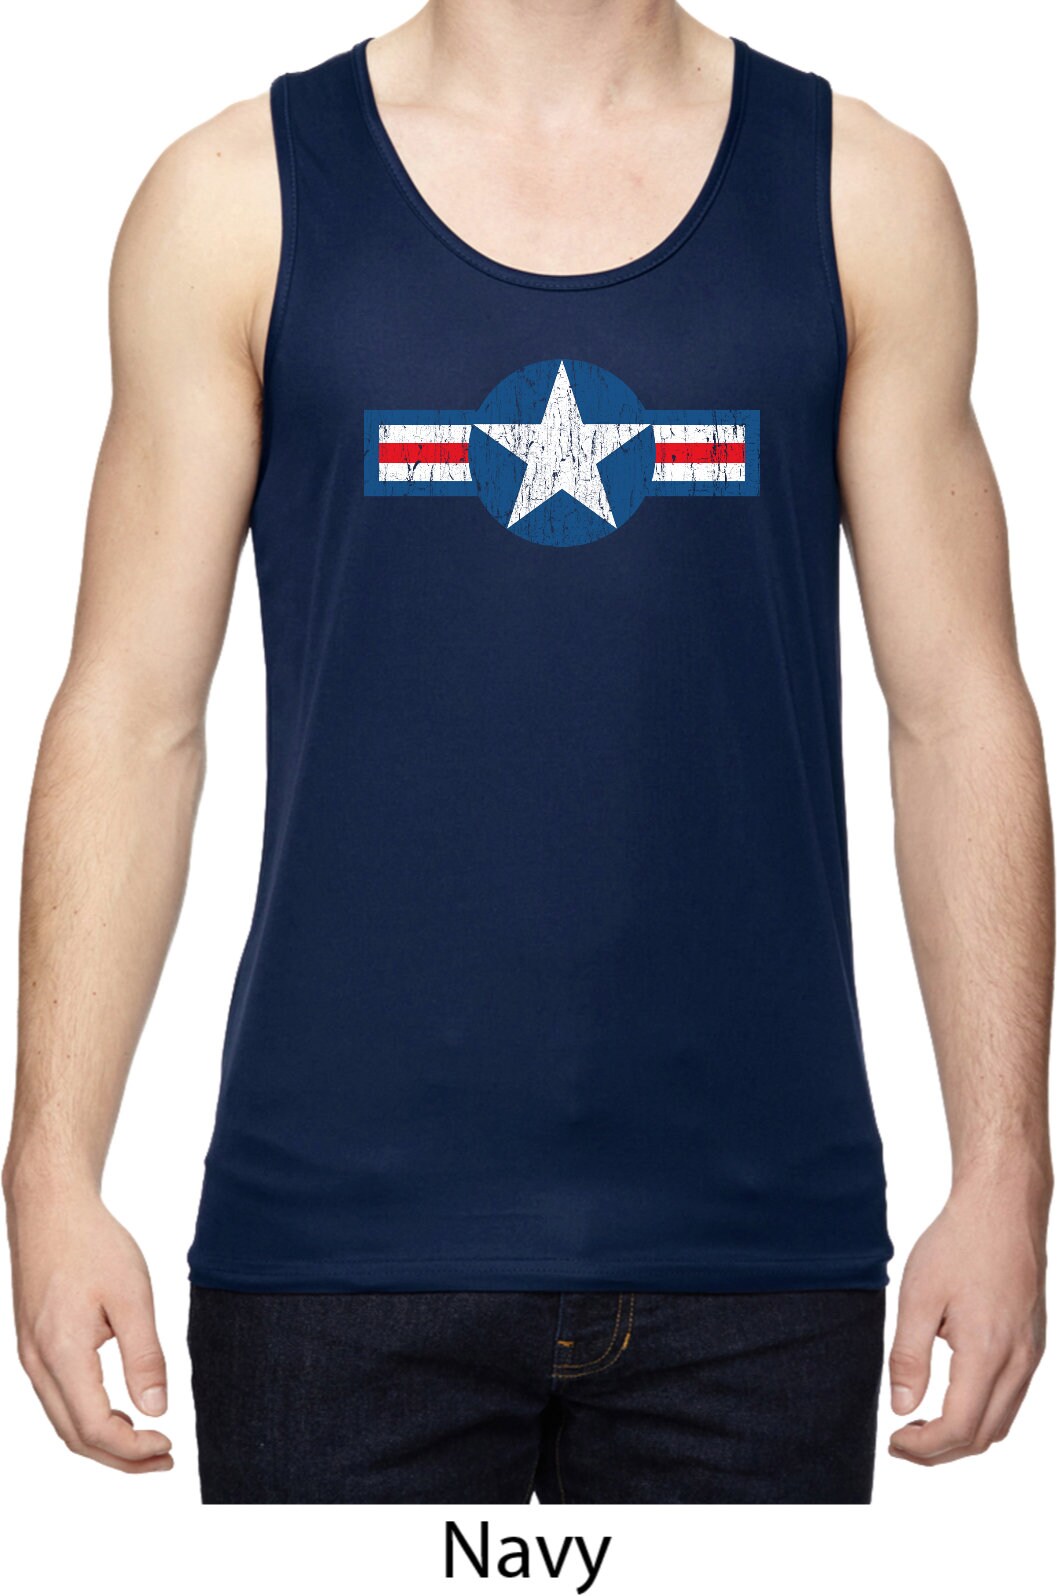 Distressed Air Force Star Men's Moisture Wicking Tank Top - Etsy